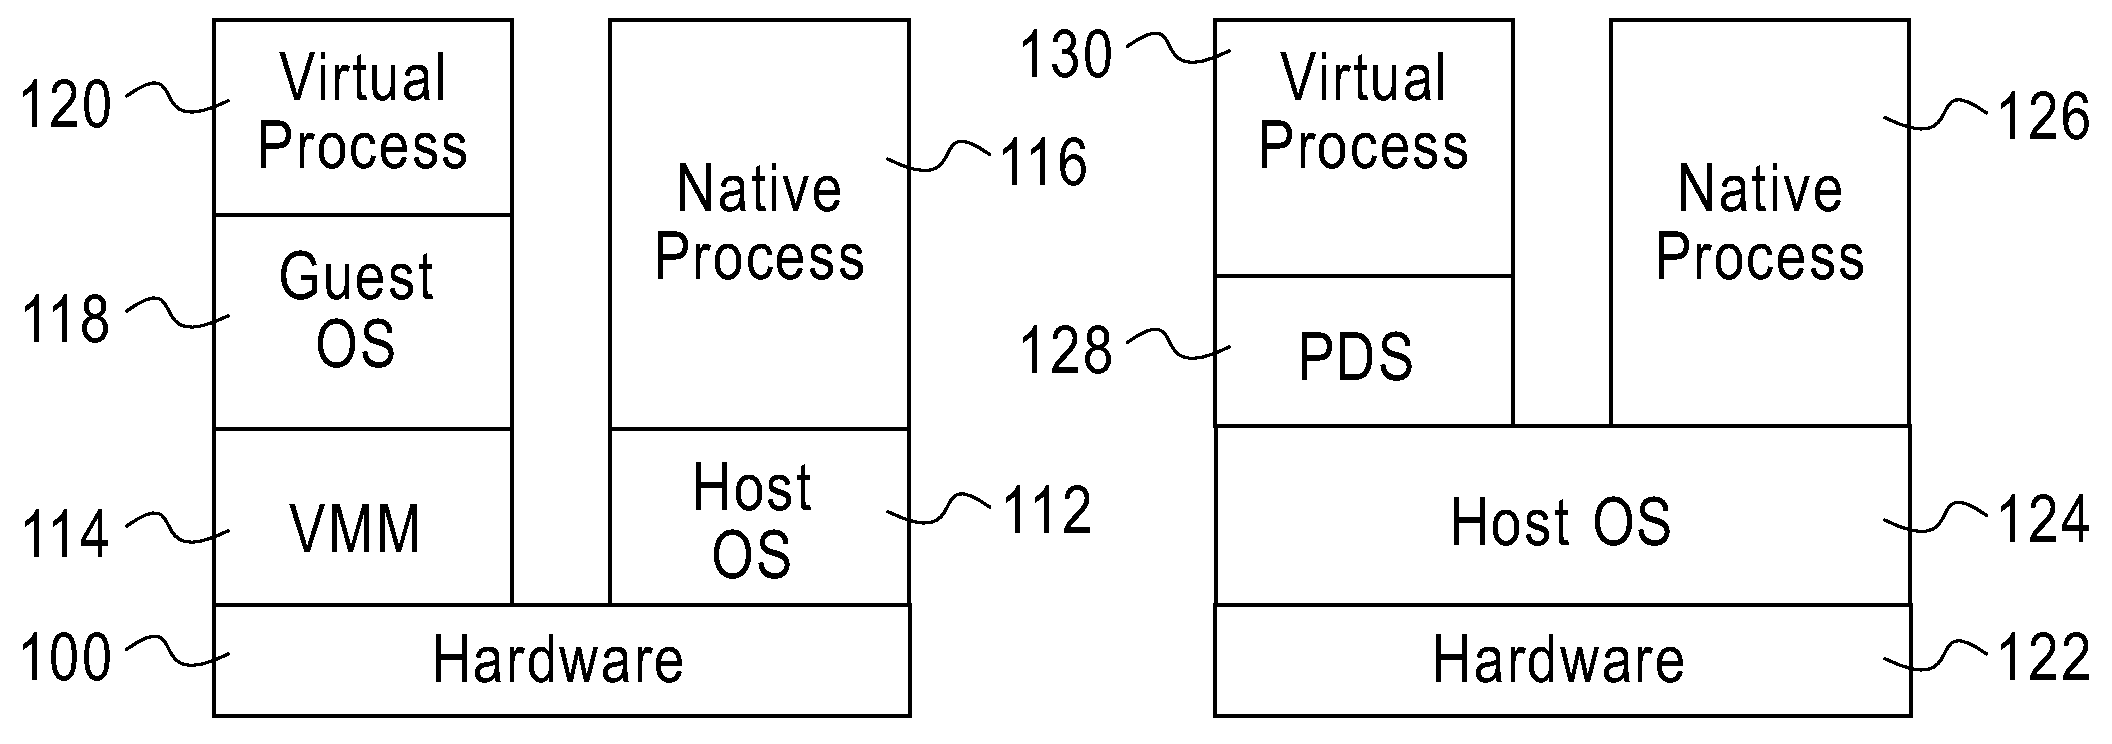 Creating a virtual machine image with a software deployment system